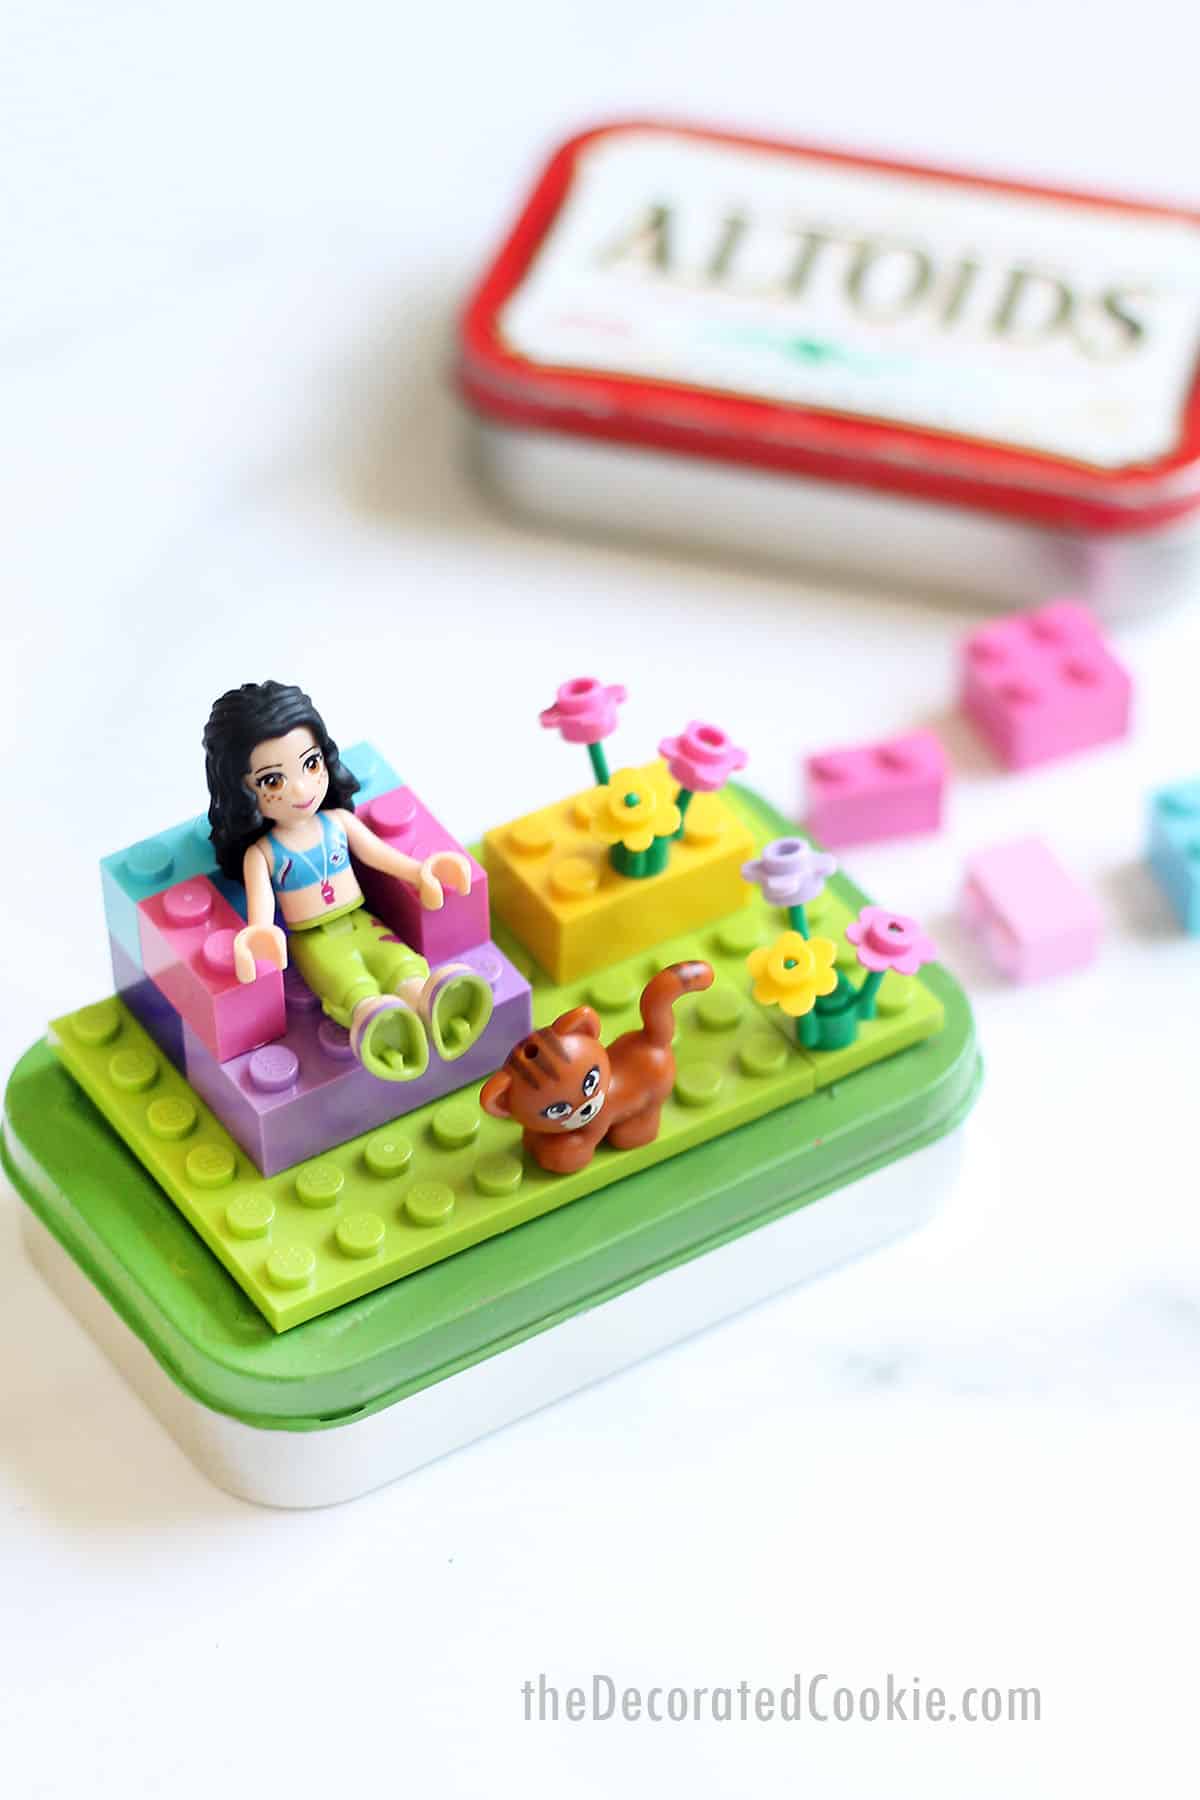 ALTOIDS TIN LEGO KITS, a fun and easy craft for kids. Video included.